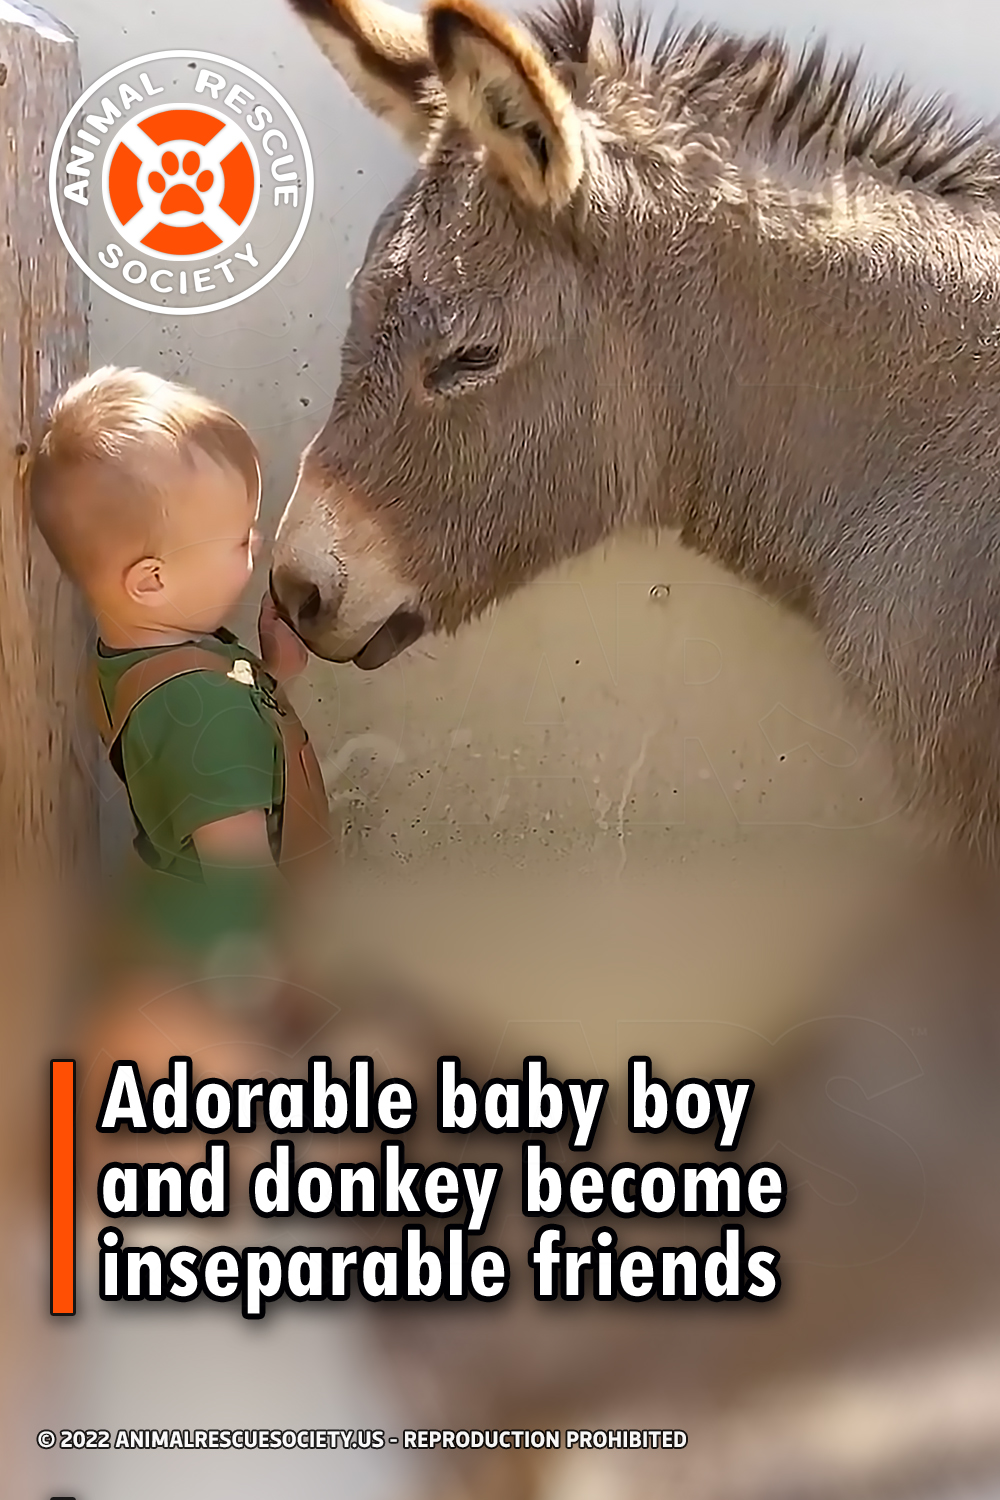 Adorable baby boy and donkey become inseparable friends